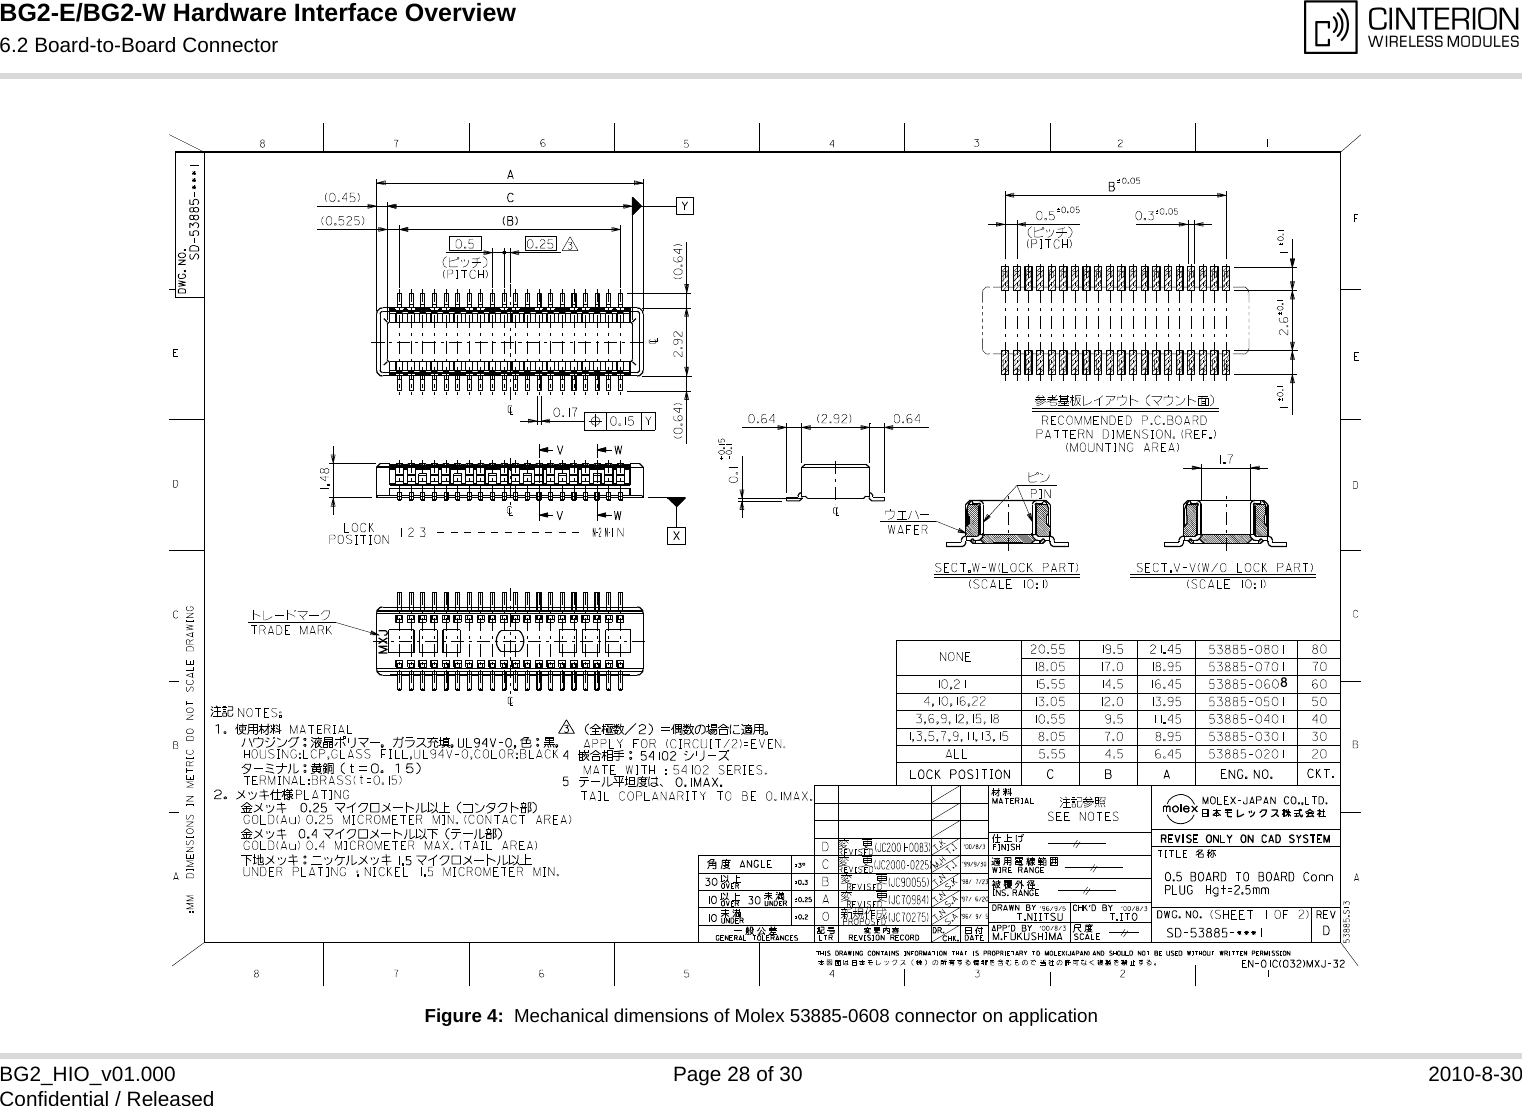 BG2-E/BG2-W Hardware Interface Overview6.2 Board-to-Board Connector28BG2_HIO_v01.000 Page 28 of 30 2010-8-30Confidential / ReleasedFigure 4:  Mechanical dimensions of Molex 53885-0608 connector on application8